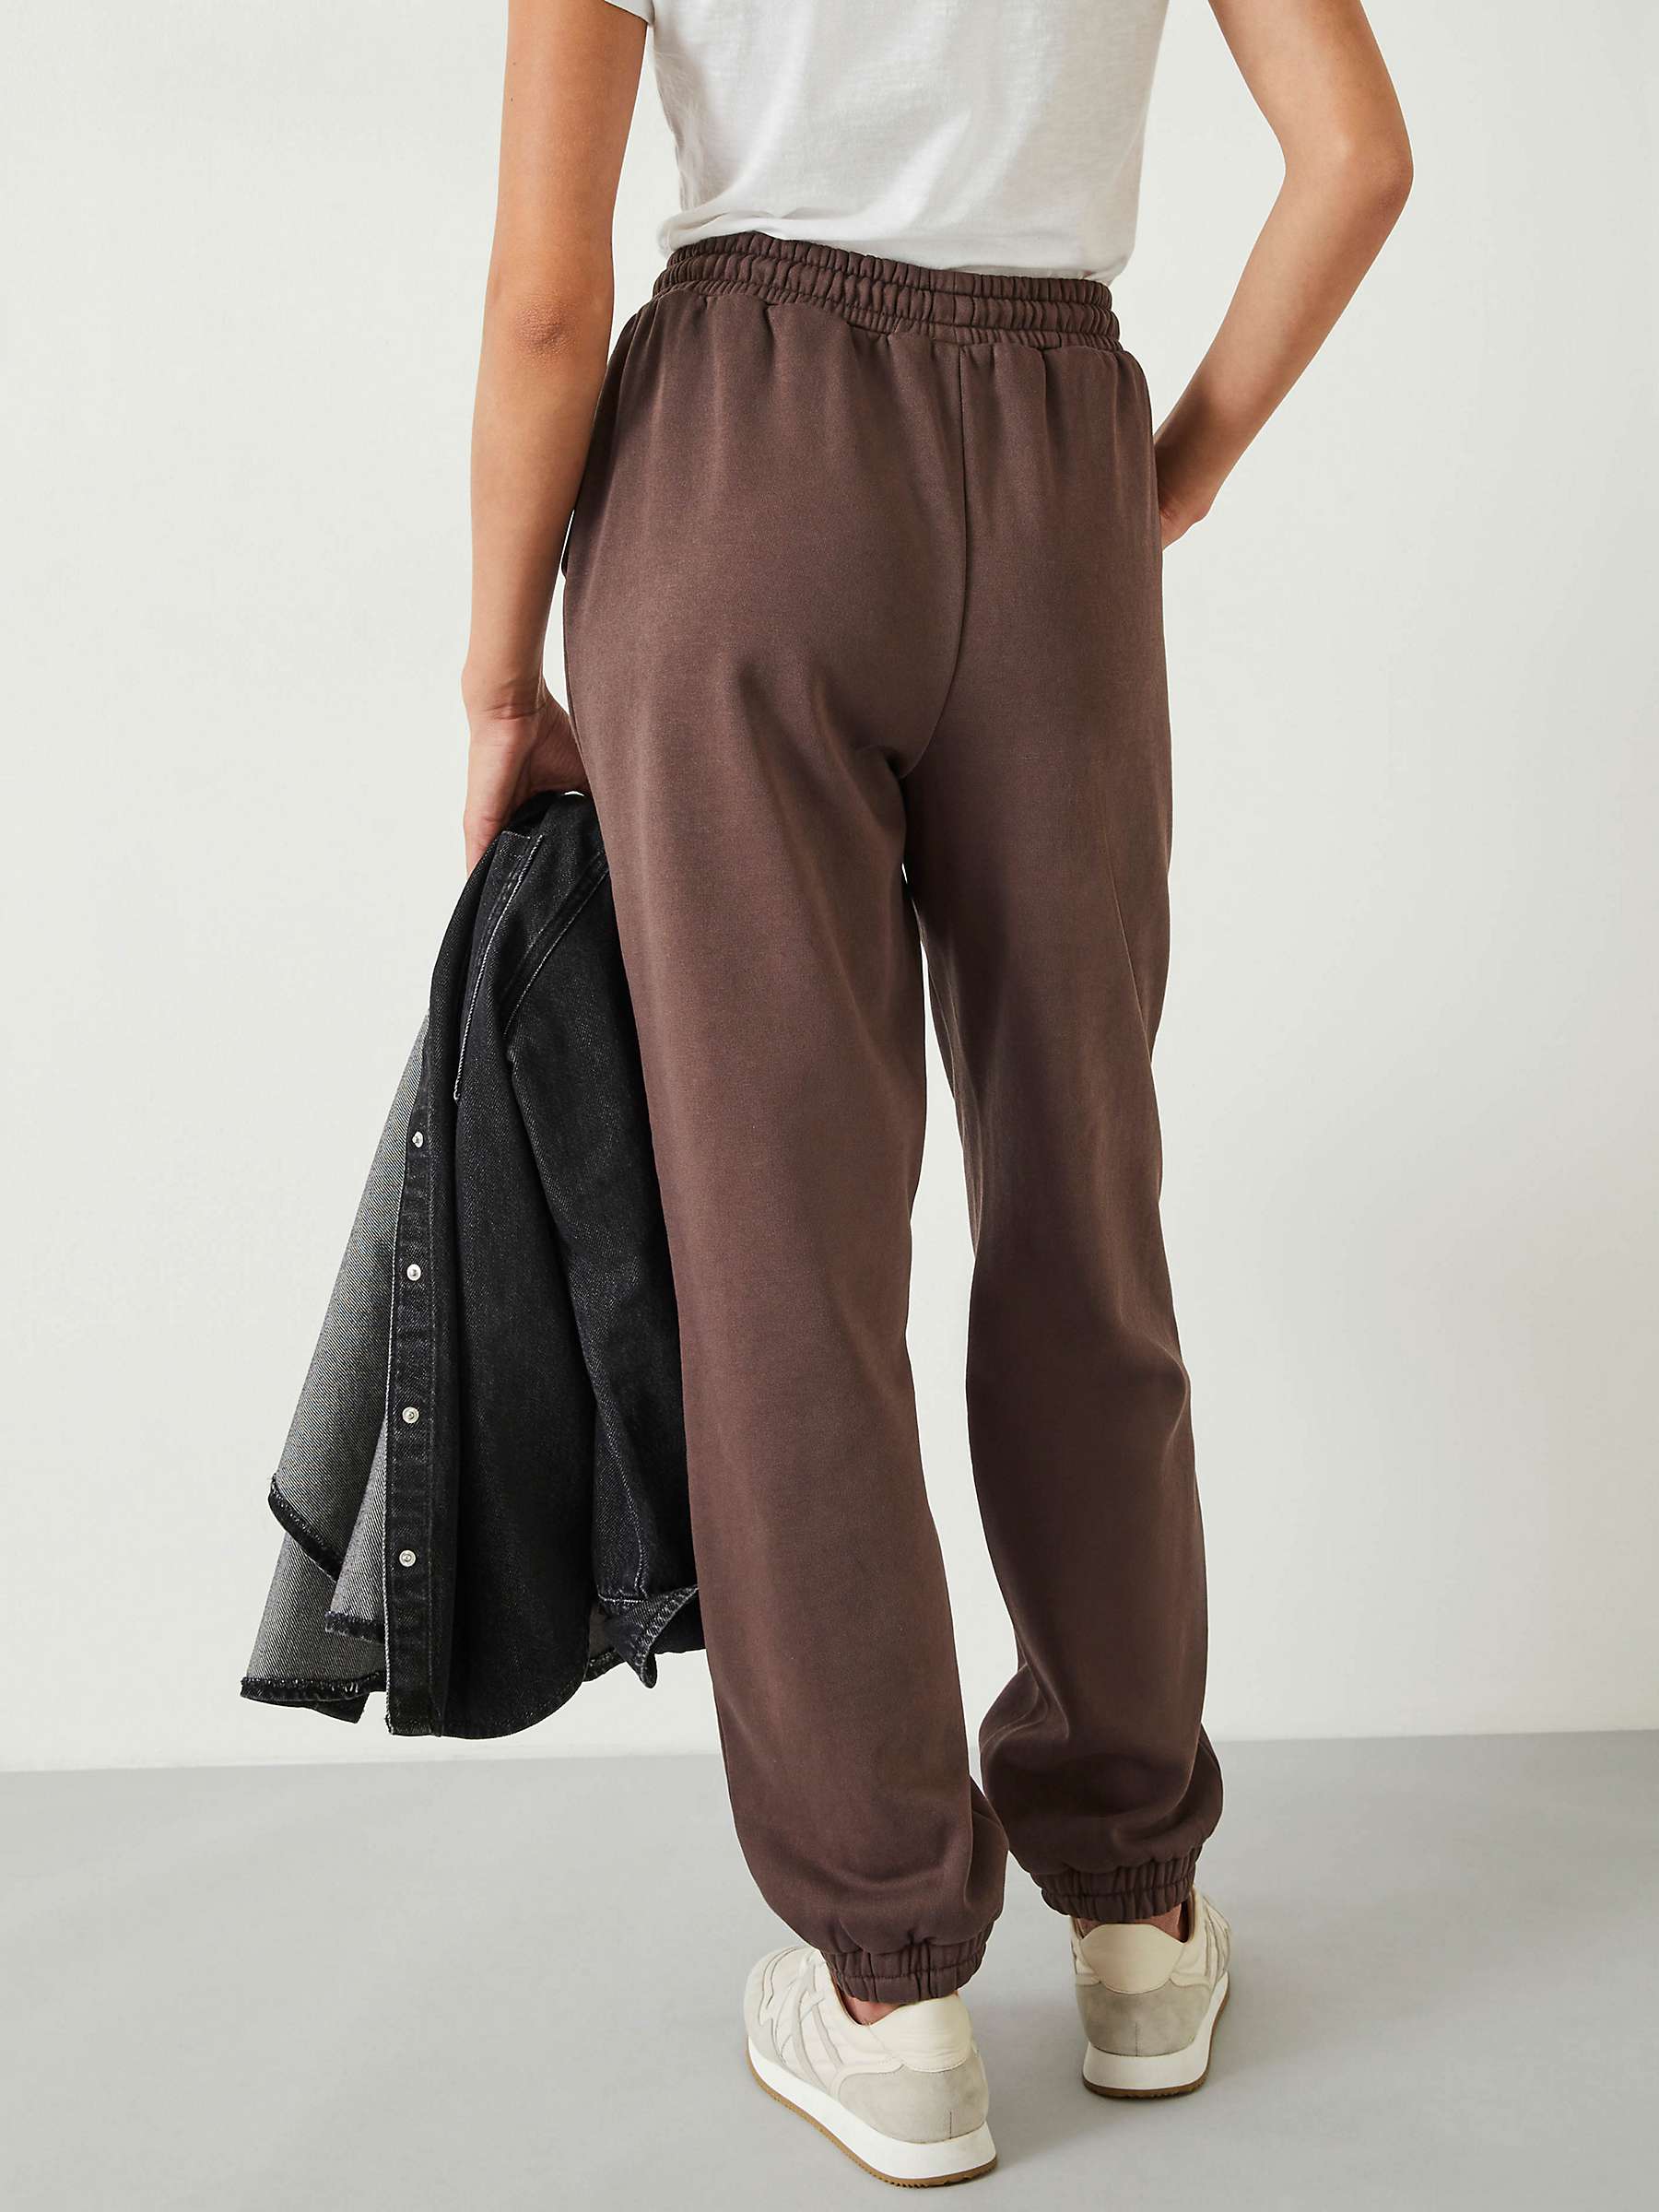 Buy HUSH Alyna Joggers Online at johnlewis.com